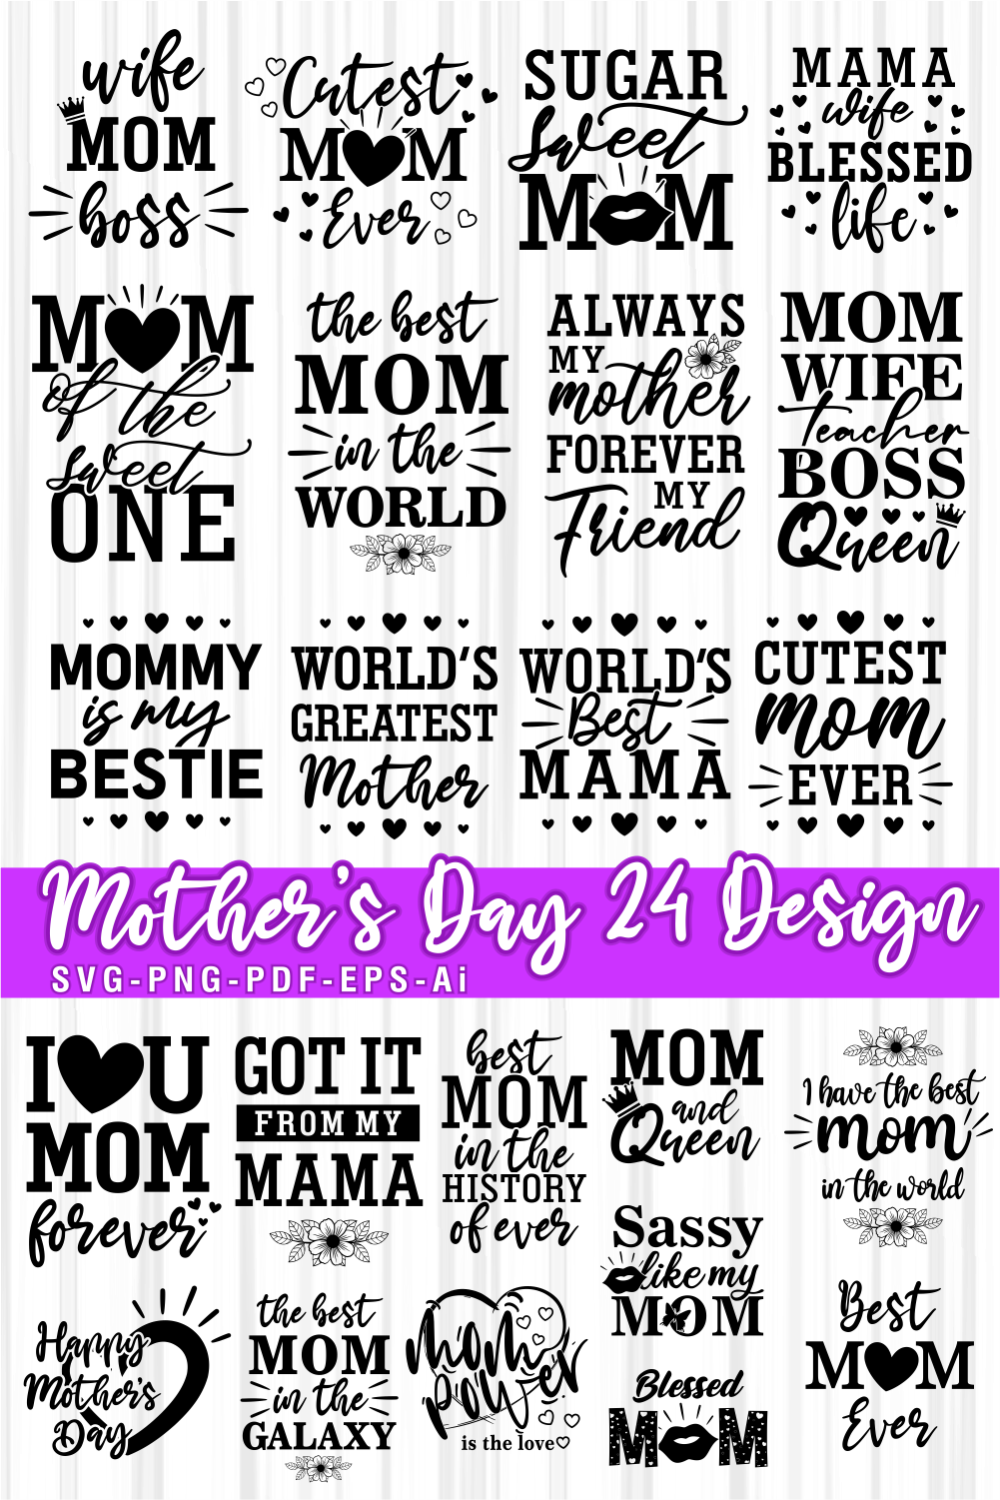 Mother's Day Inspirational & Motivational Quotes SVG T shirt Design Vector Bundle, Mothers Day SVG Bundle, Funny Mom Life Quotes SVG Bundle, Mothers Day Quote Vector Designs, Women's Day pinterest preview image.